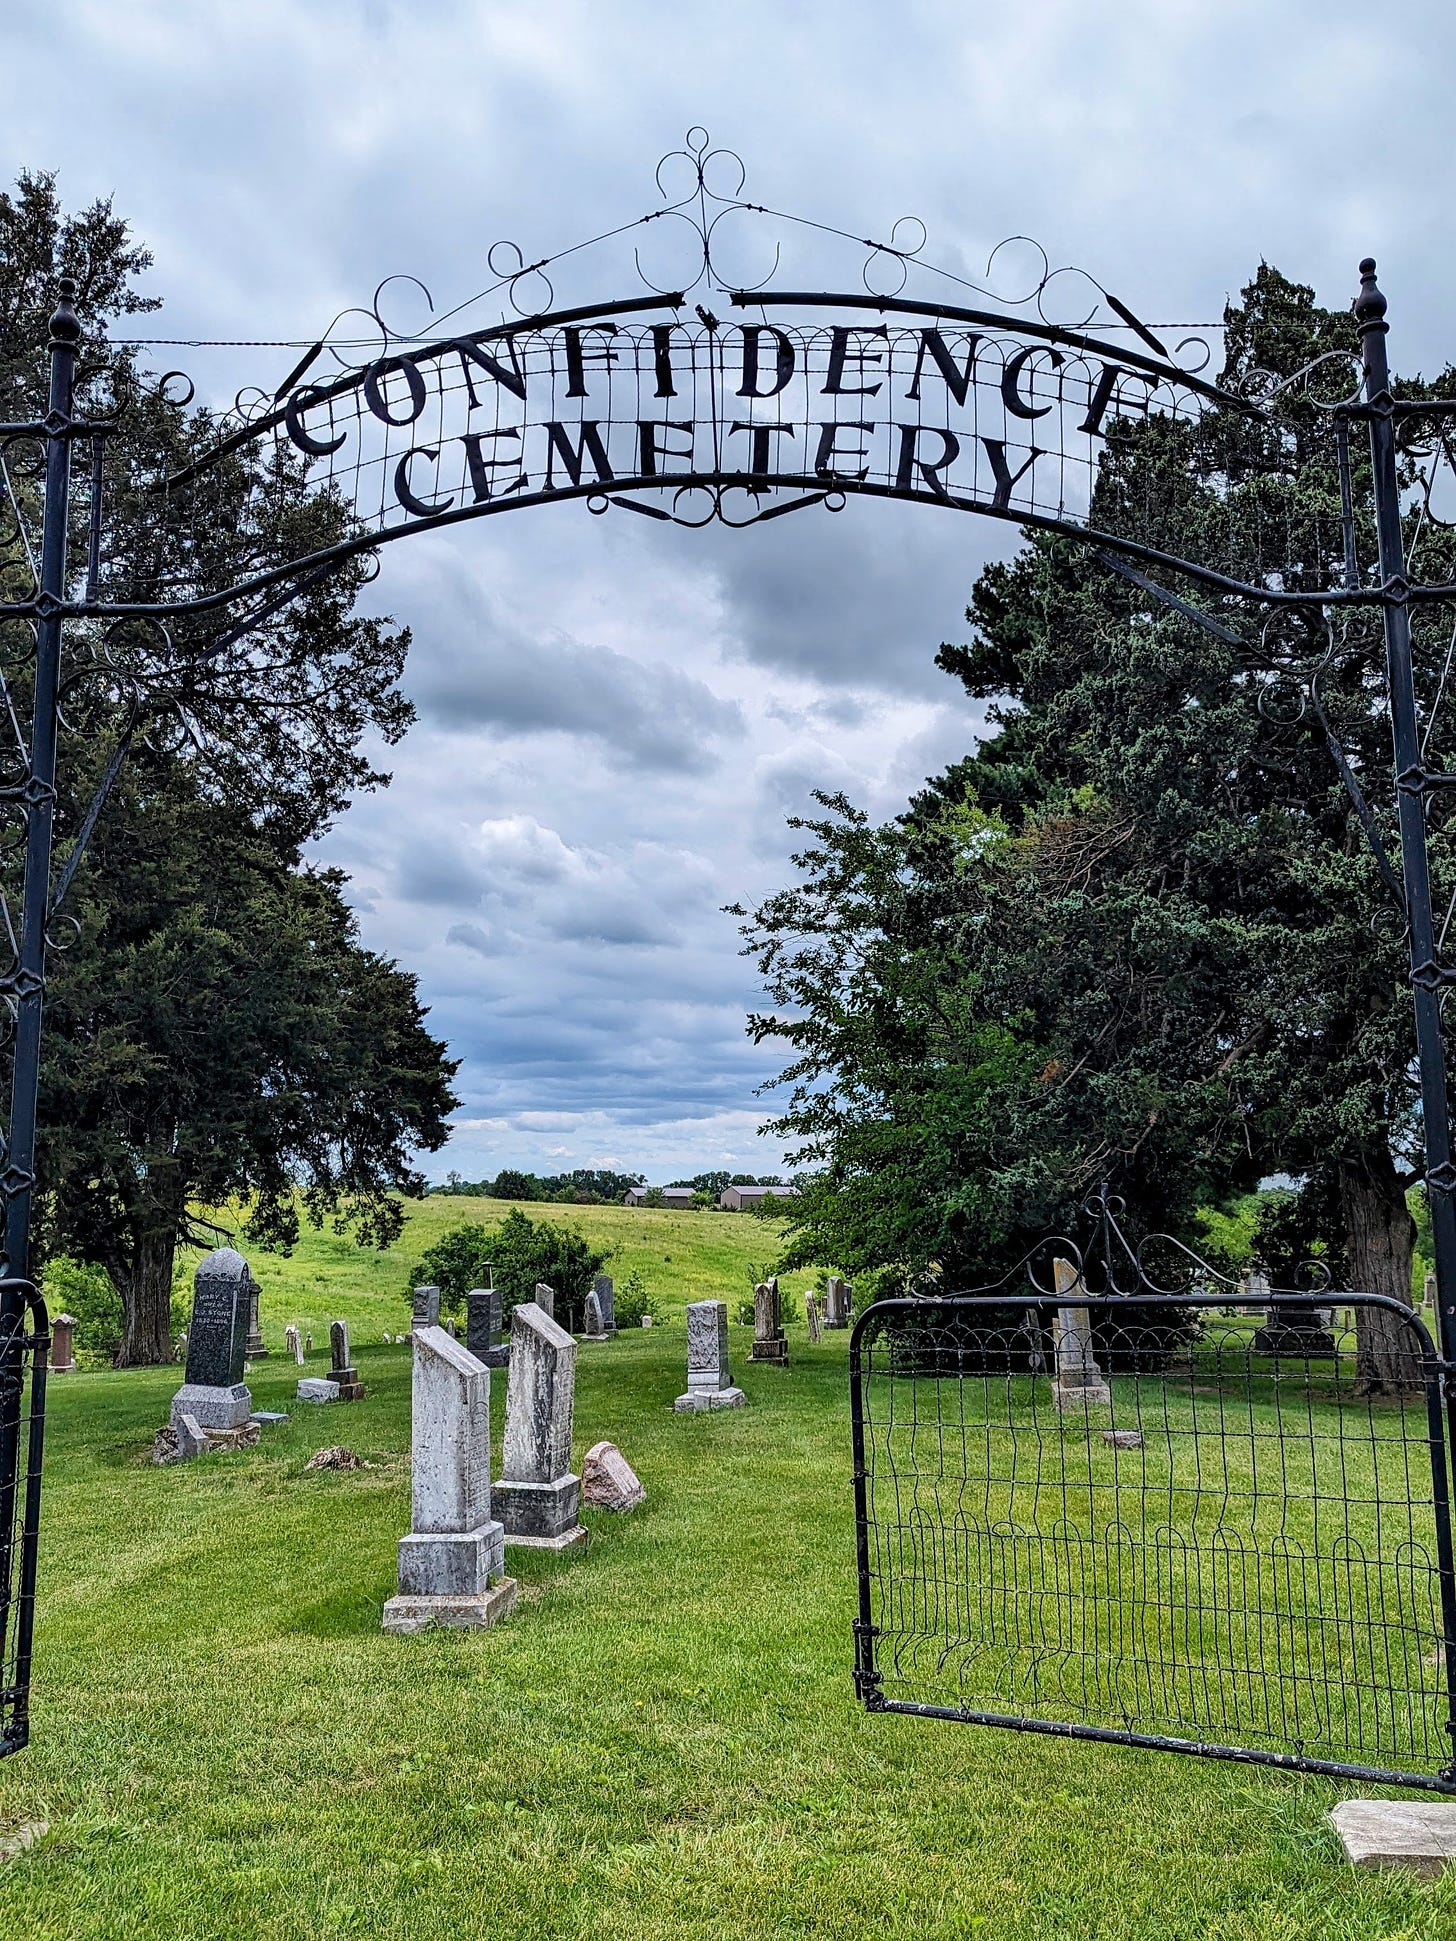 An old cemetery with an iron gate that says 'Confidence Cemetery'